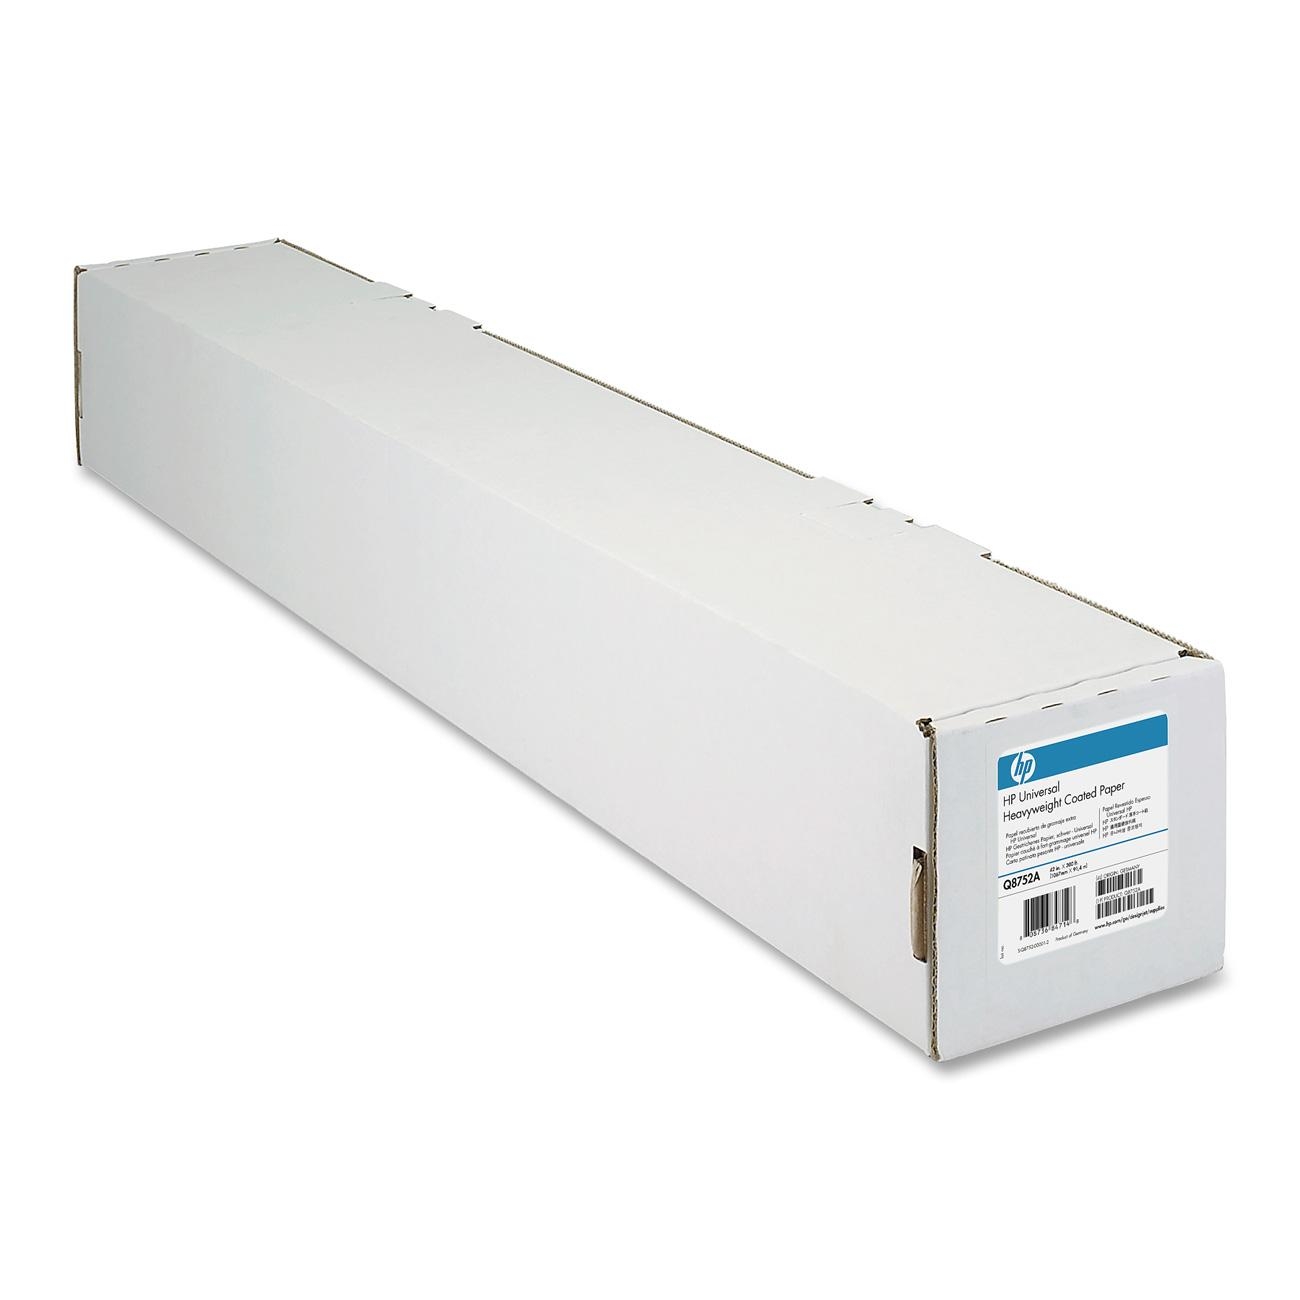 HP Q1413A Universal Heavyweight Coated Paper   36" x 100' paper for HP designjets   1 roll